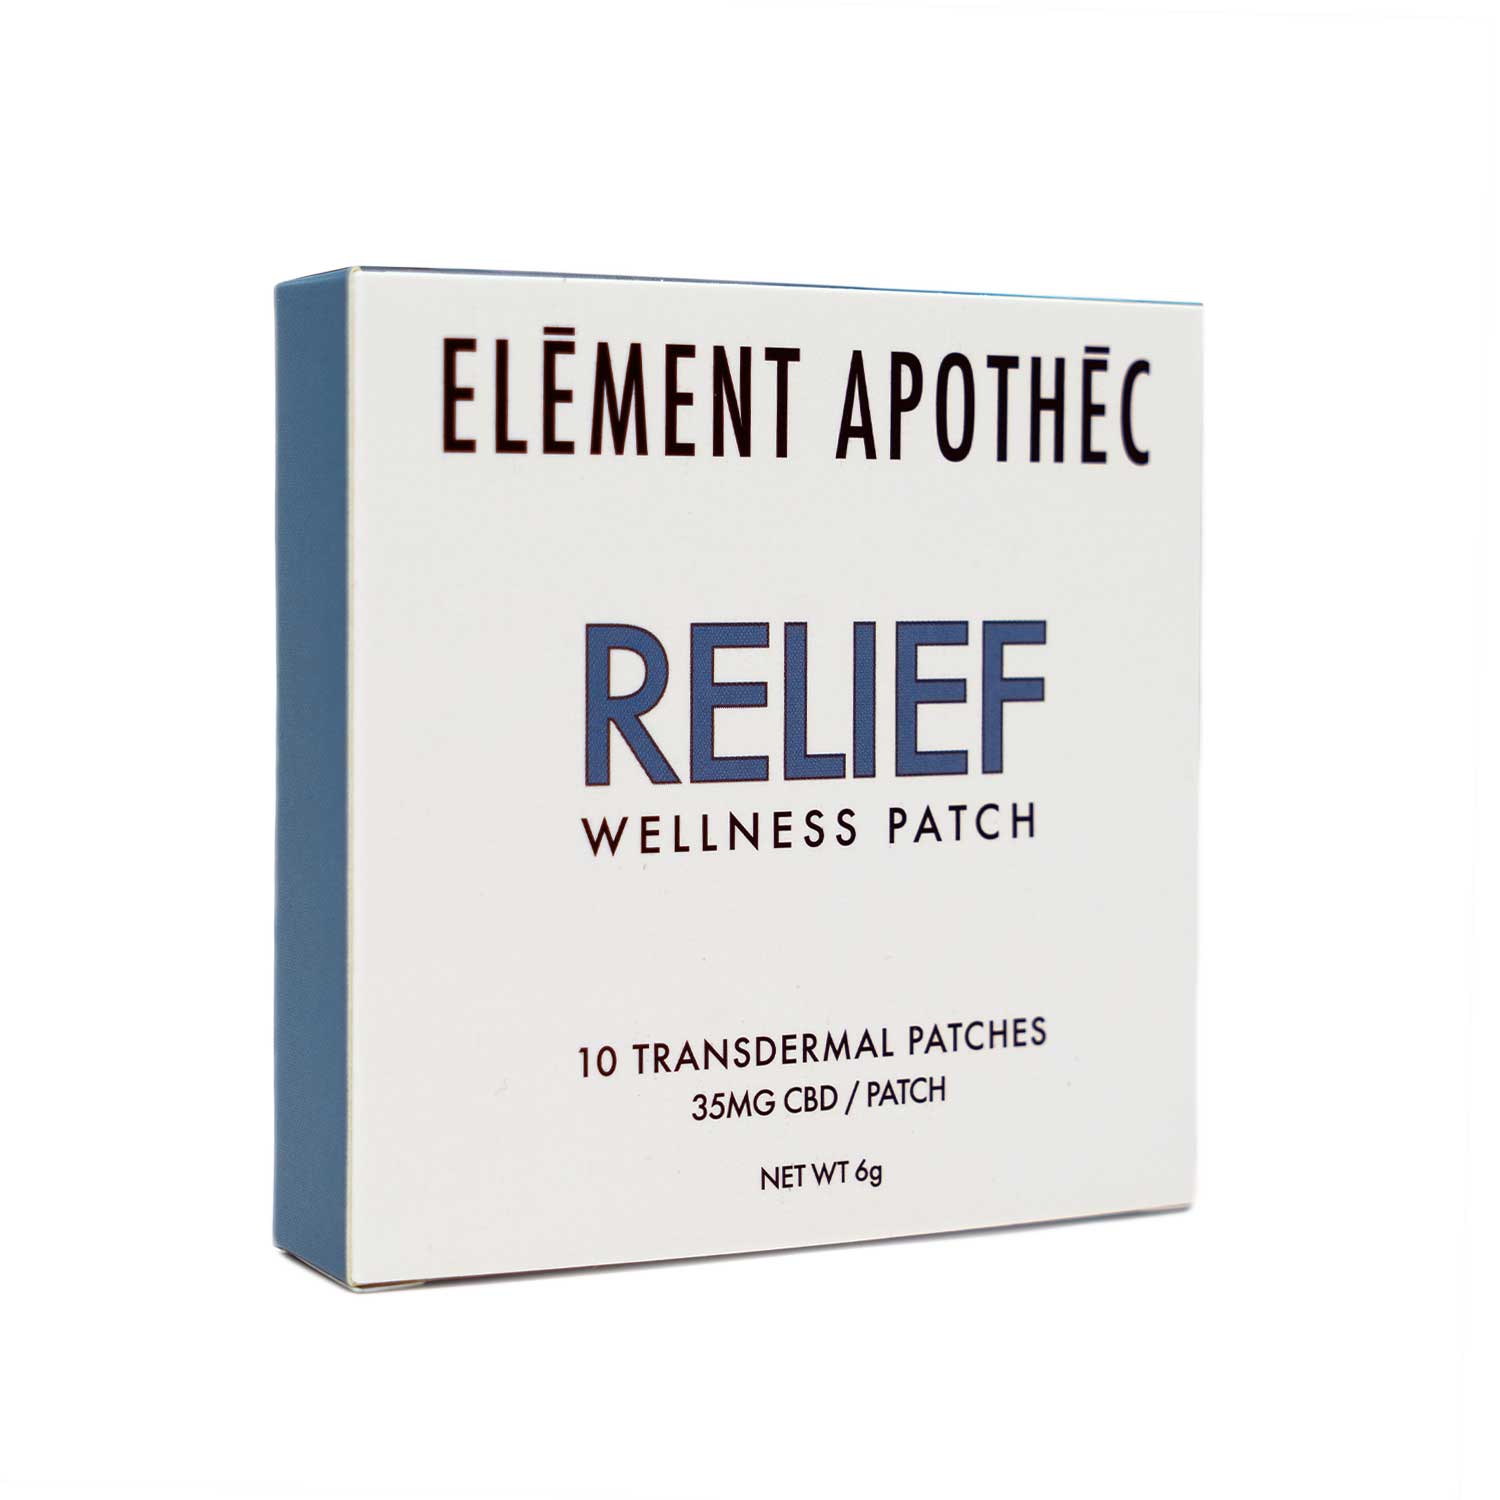 Wholesale Nausea Relief Patch for your store